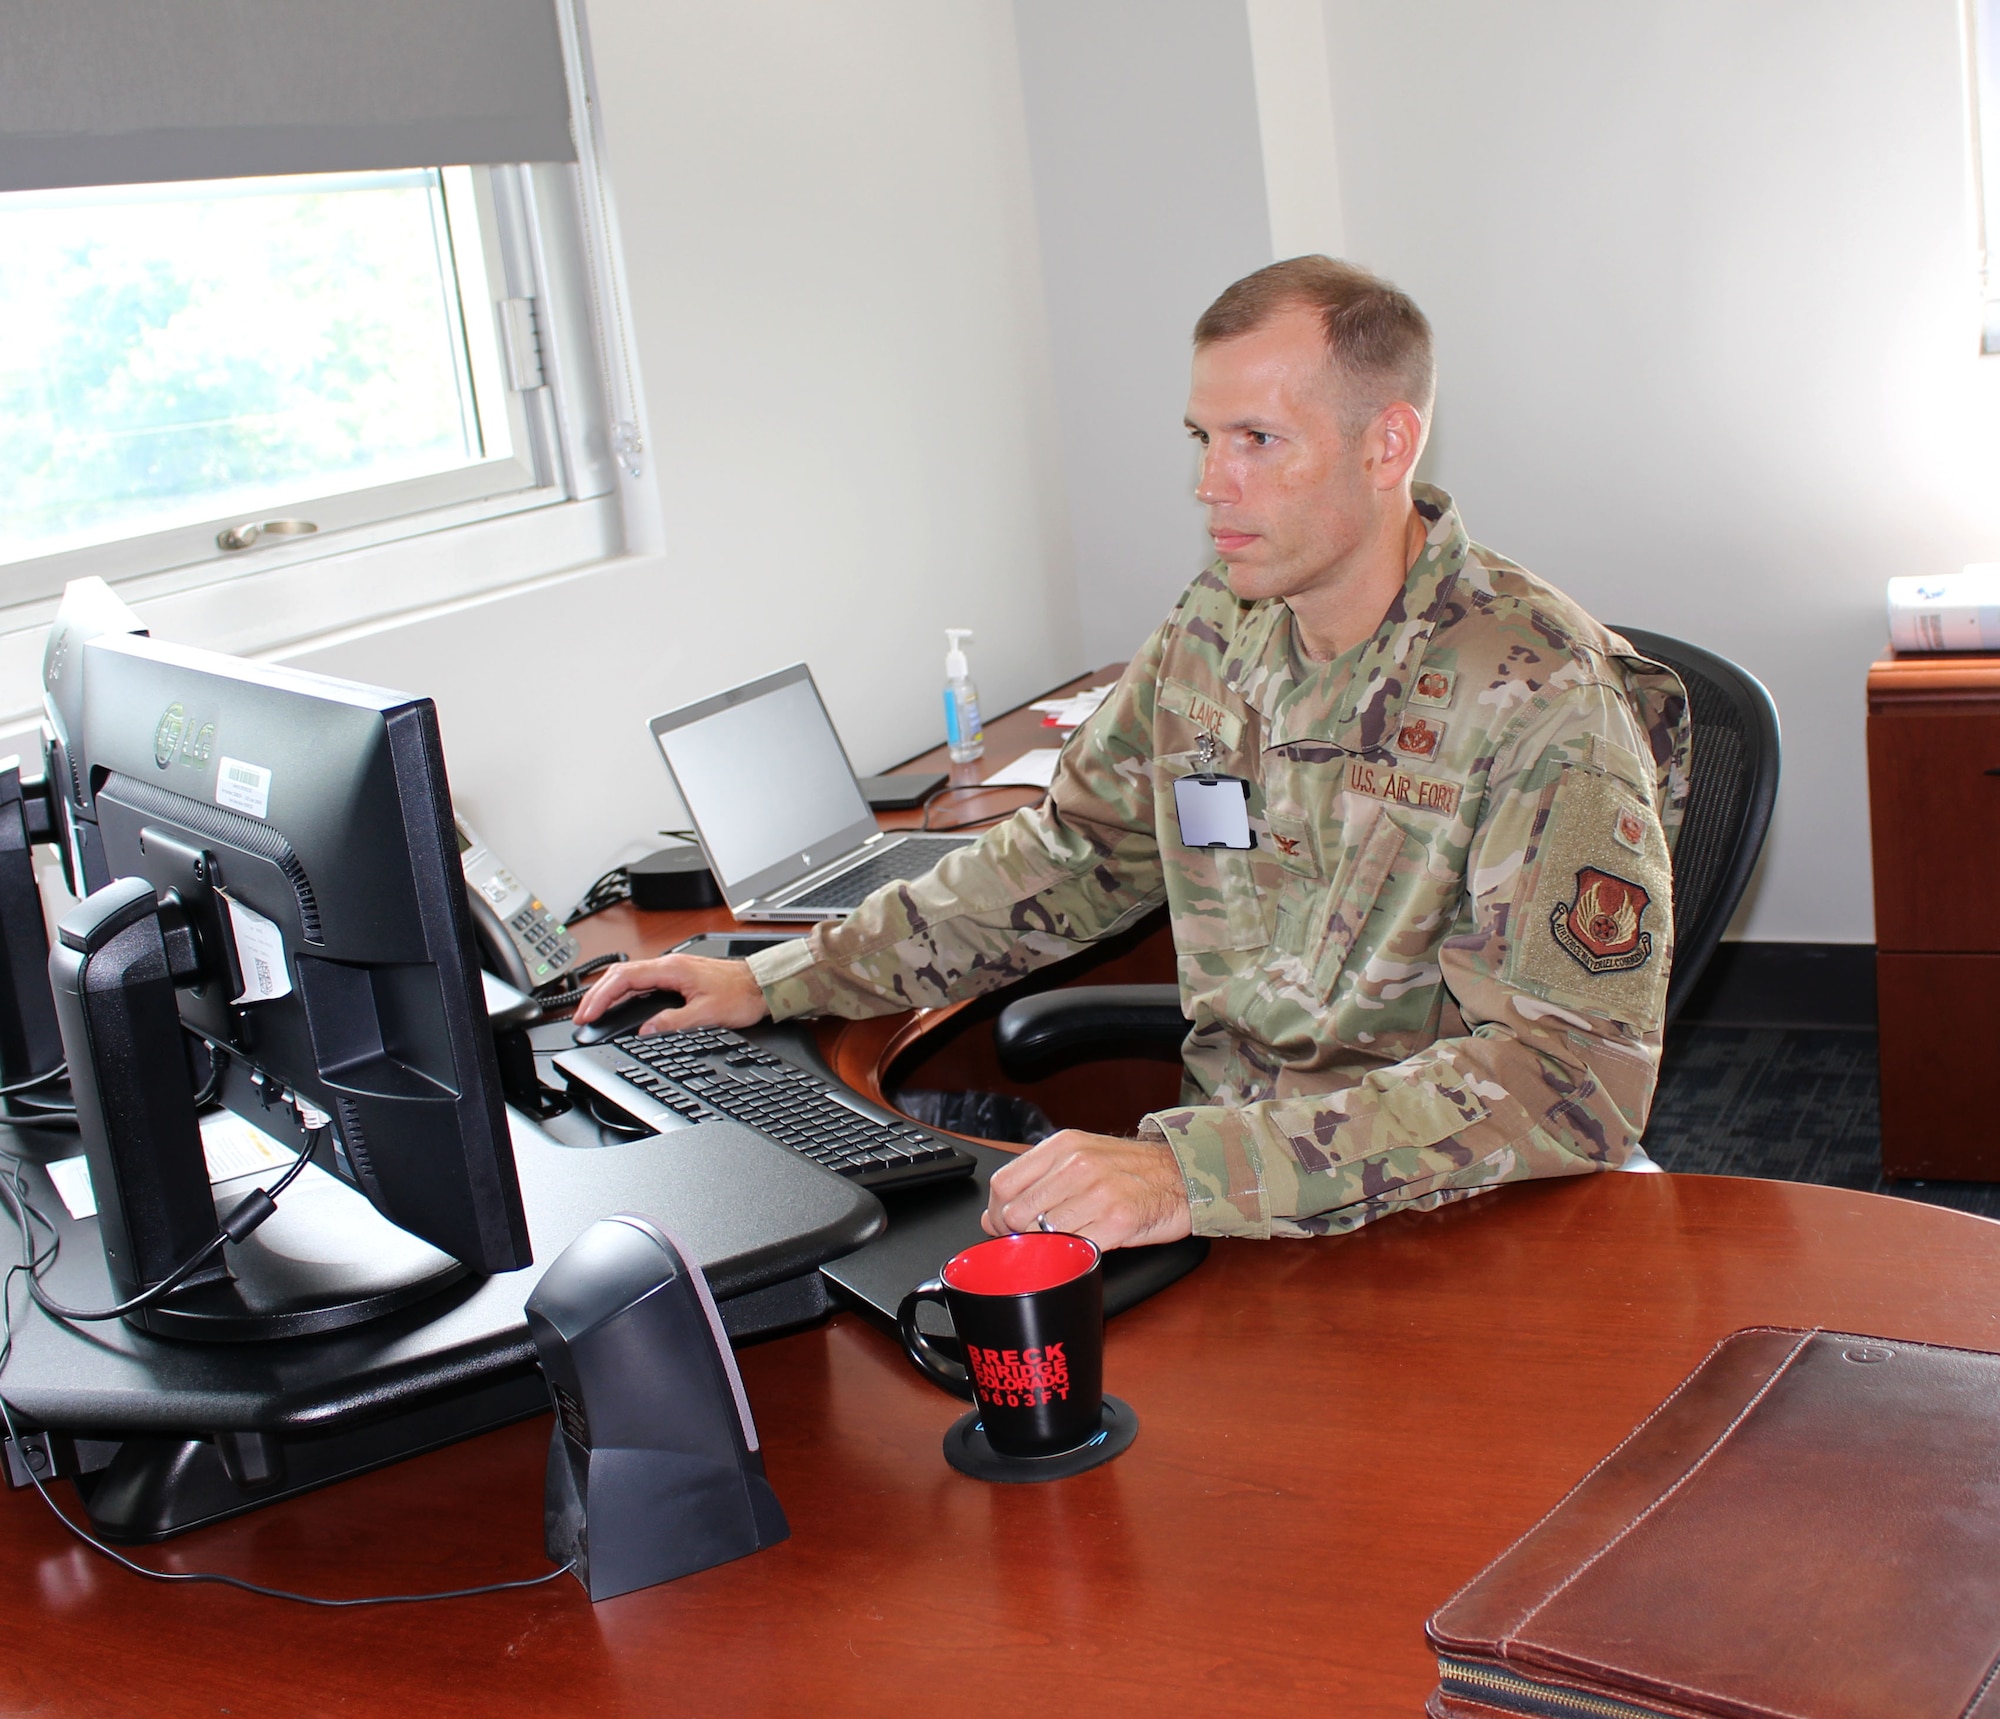 Col. Robert Lance, chief of the Arnold Engineering Development Complex Test Support Division, works in his office at Arnold Air Force Base, Tenn., Aug. 20, 2021. (U.S. Air Force photo by Deidre Moon) (This image has been altered by blurring a badge for security purposes.)